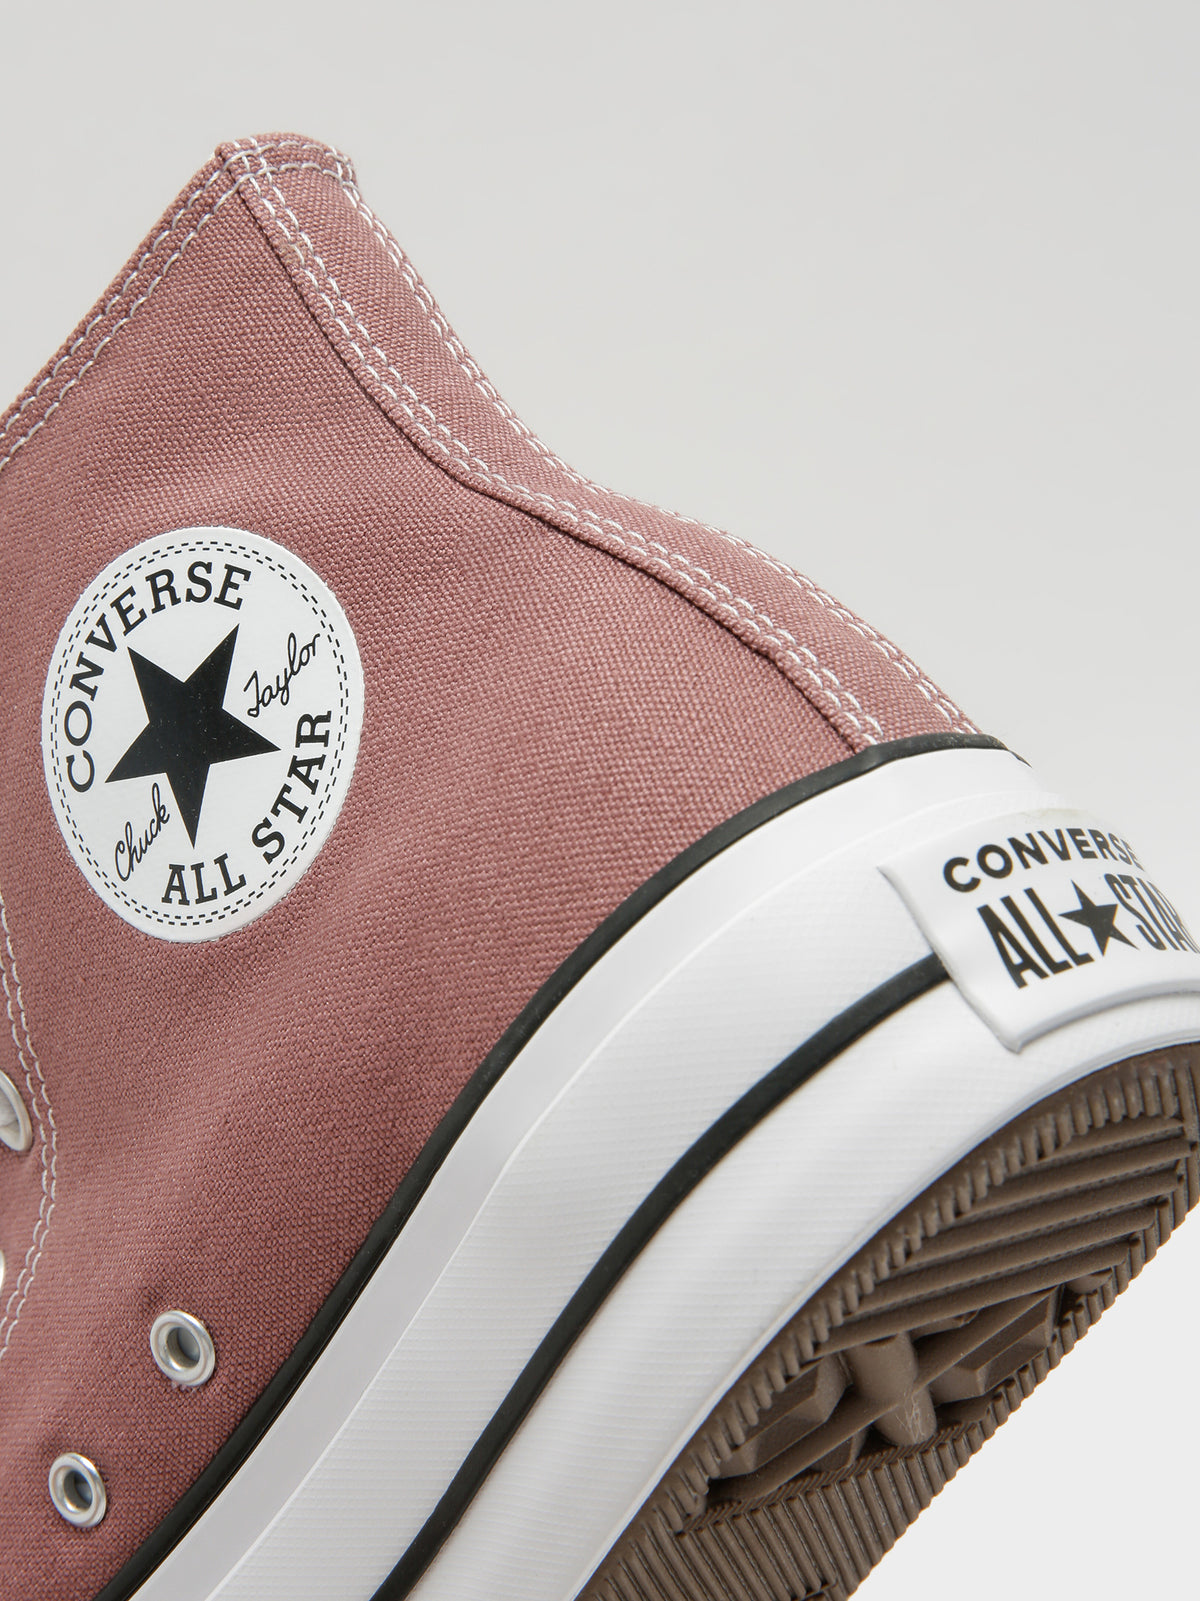 Womens Chuck Taylor All Star High Top Sneakers in Saddle Brown